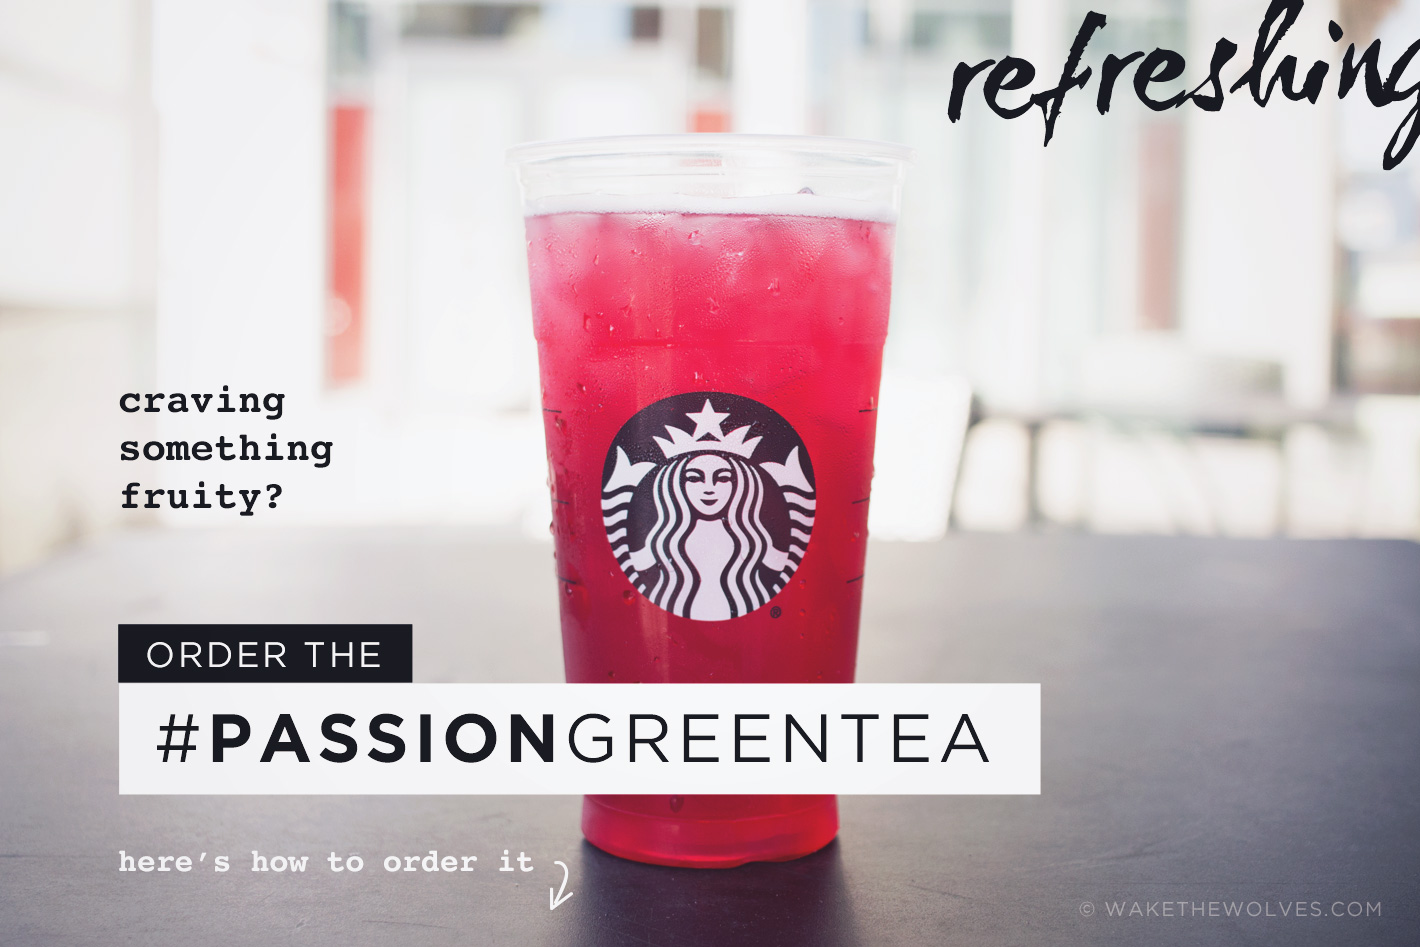 Healthy Starbucks Drinks - Pink Drink | Wake the Wolves